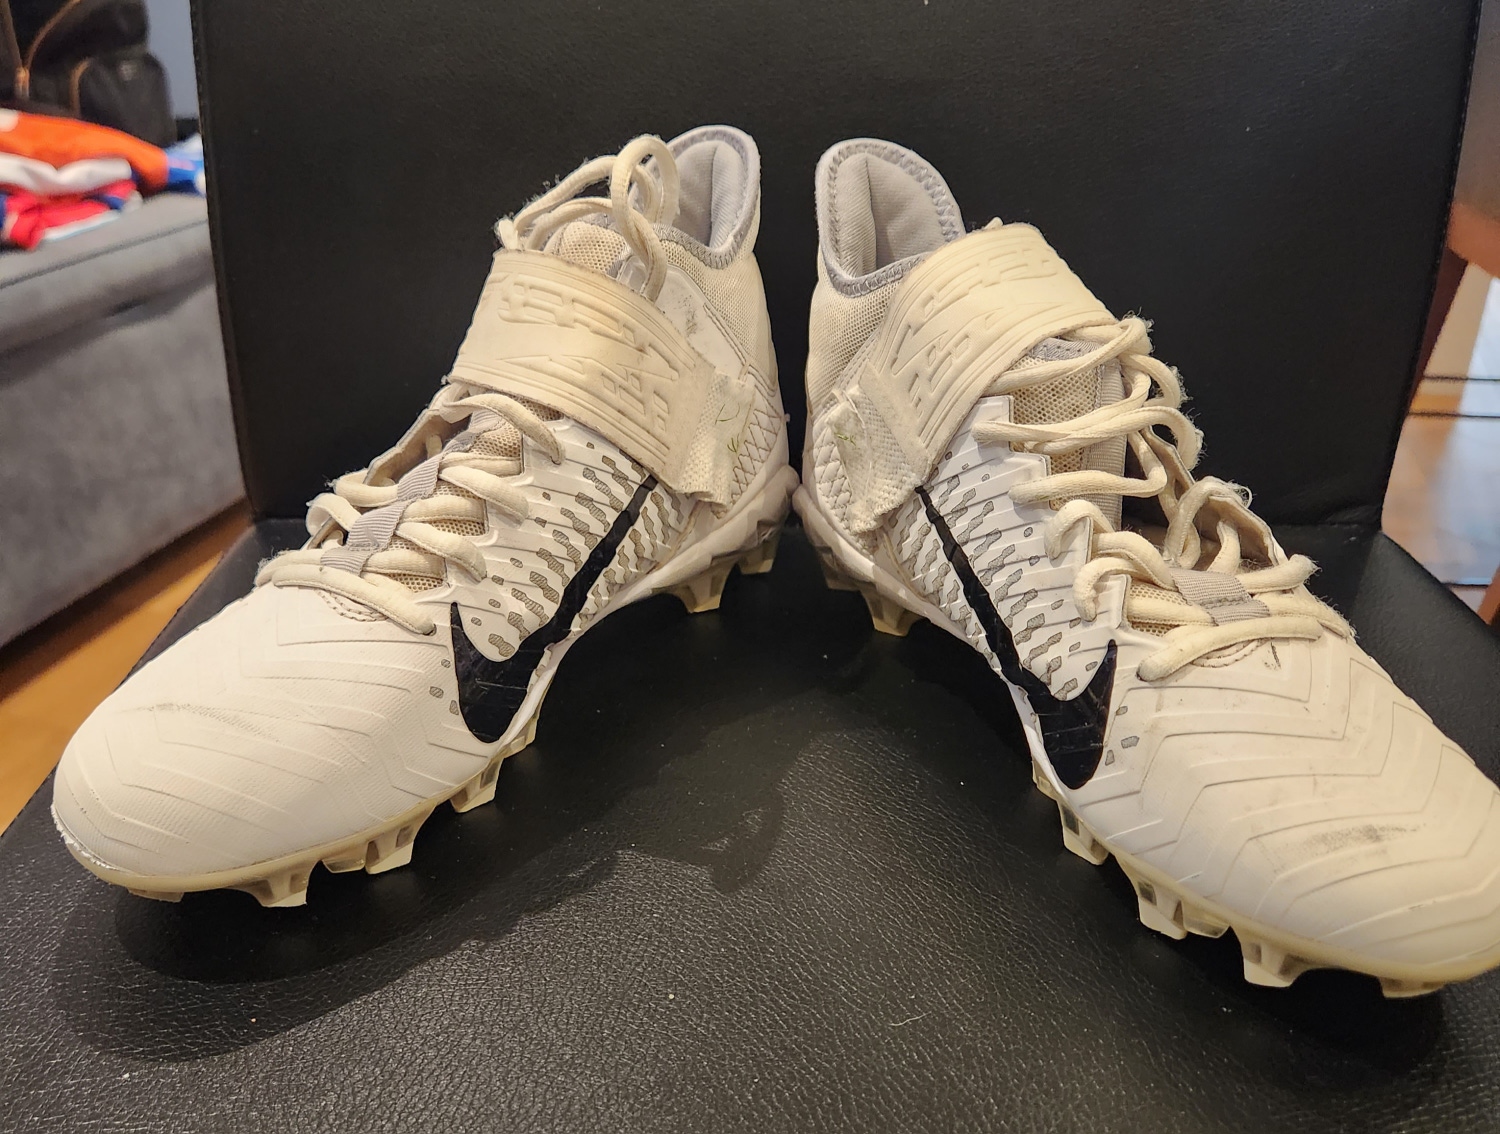 Used size 7 Men's Nike Alpha Molded Cleats